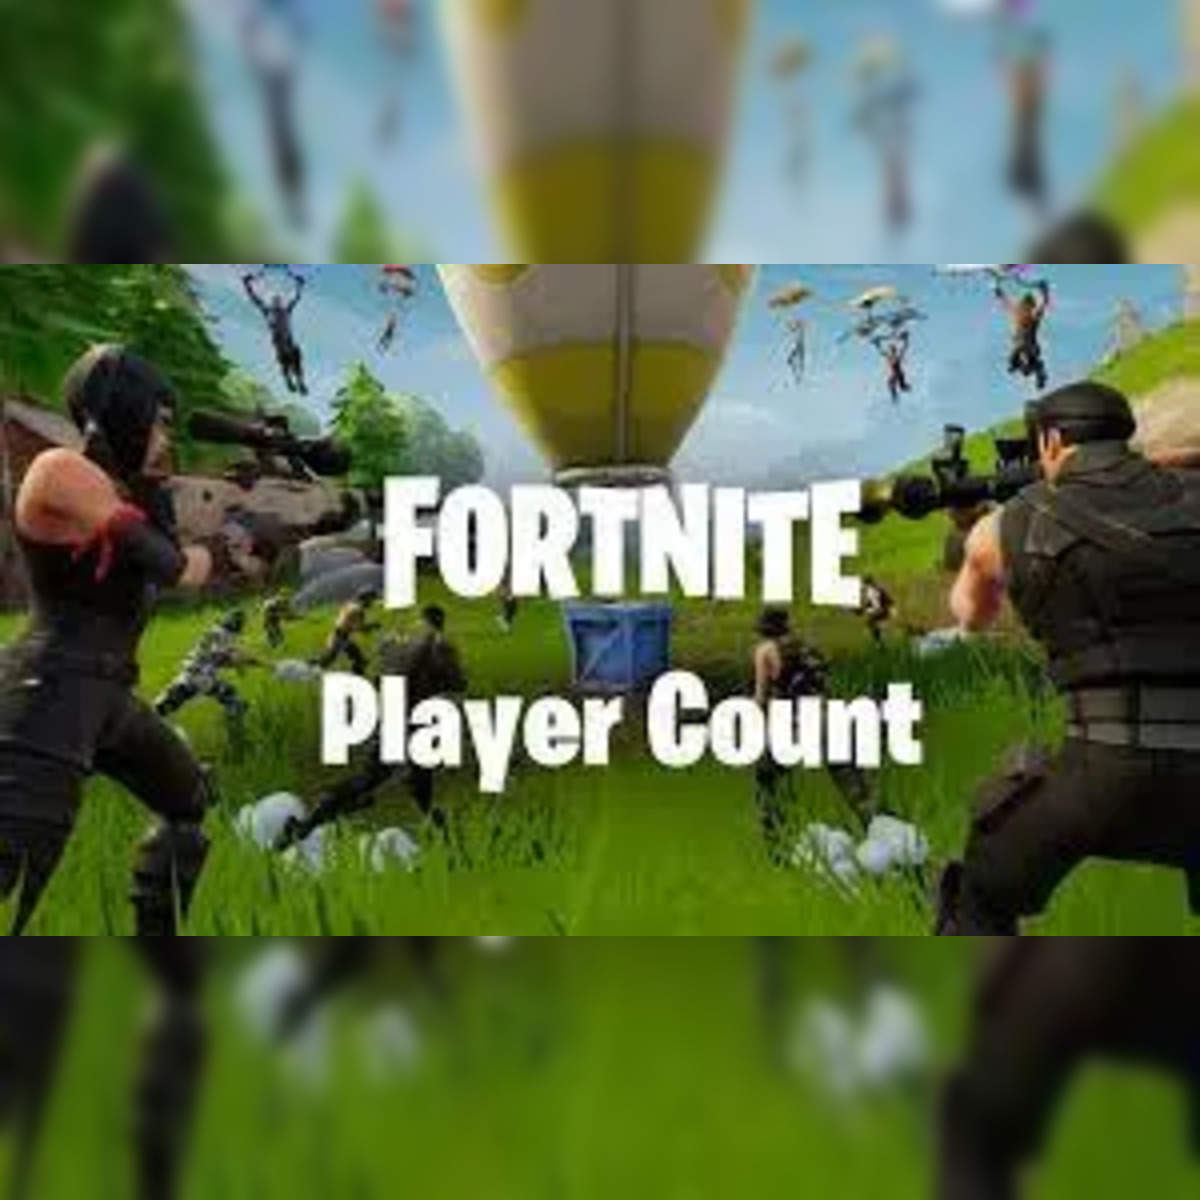 player count: Fortnite player count: How many people play the game